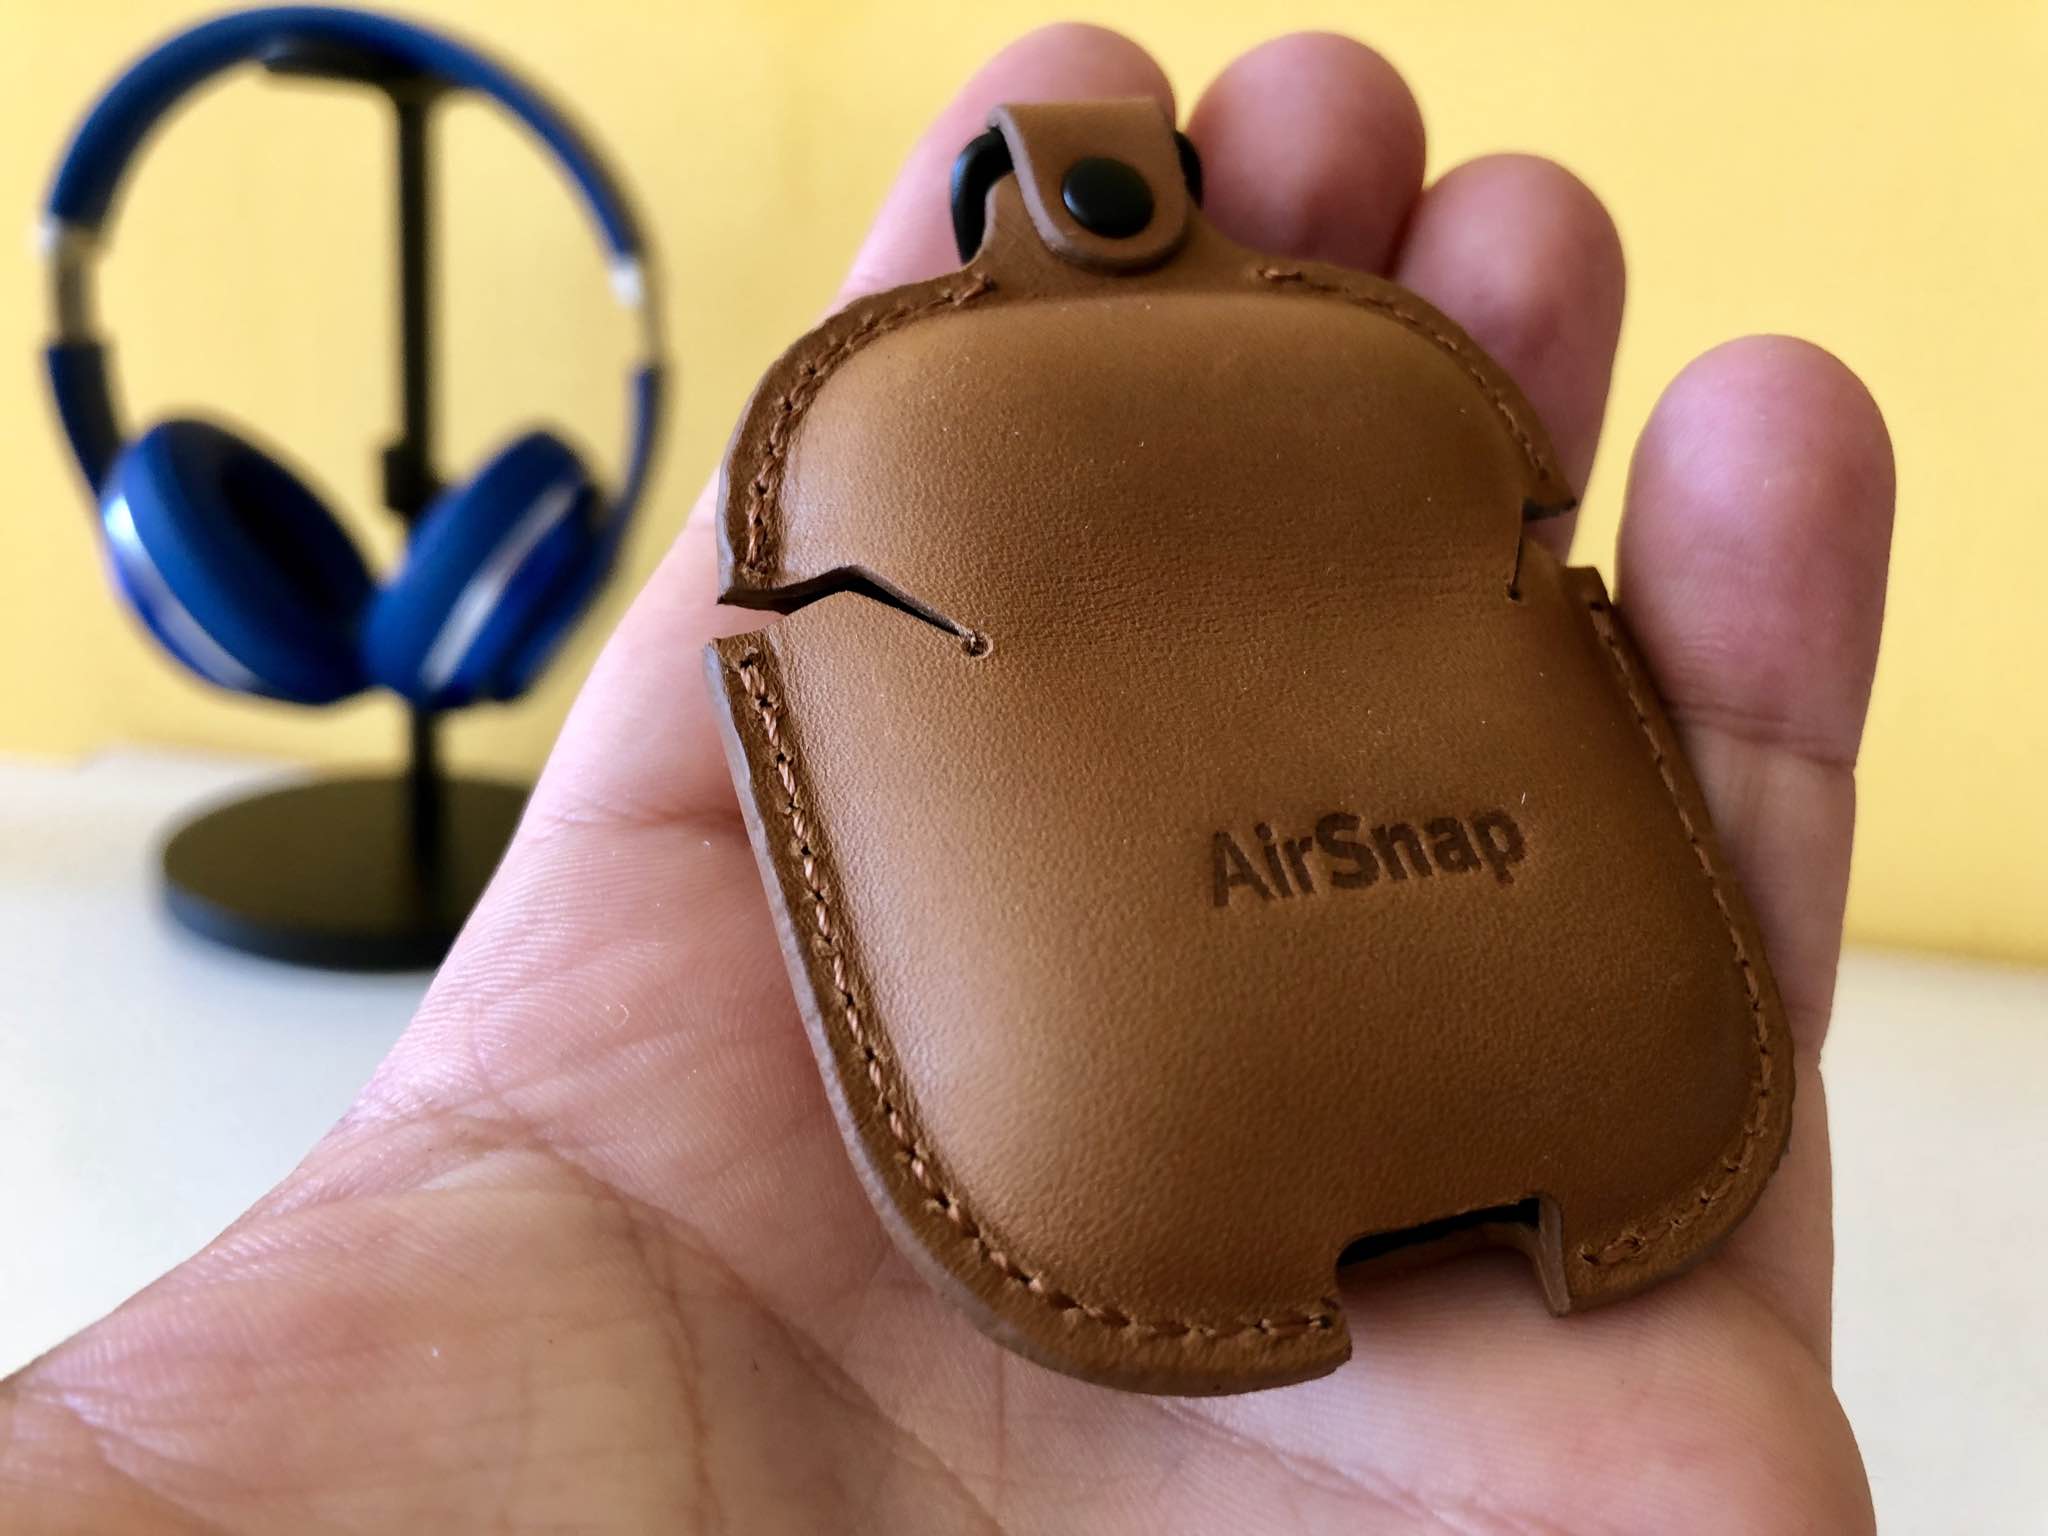 The image showing the slits on the back of the AirSnap case